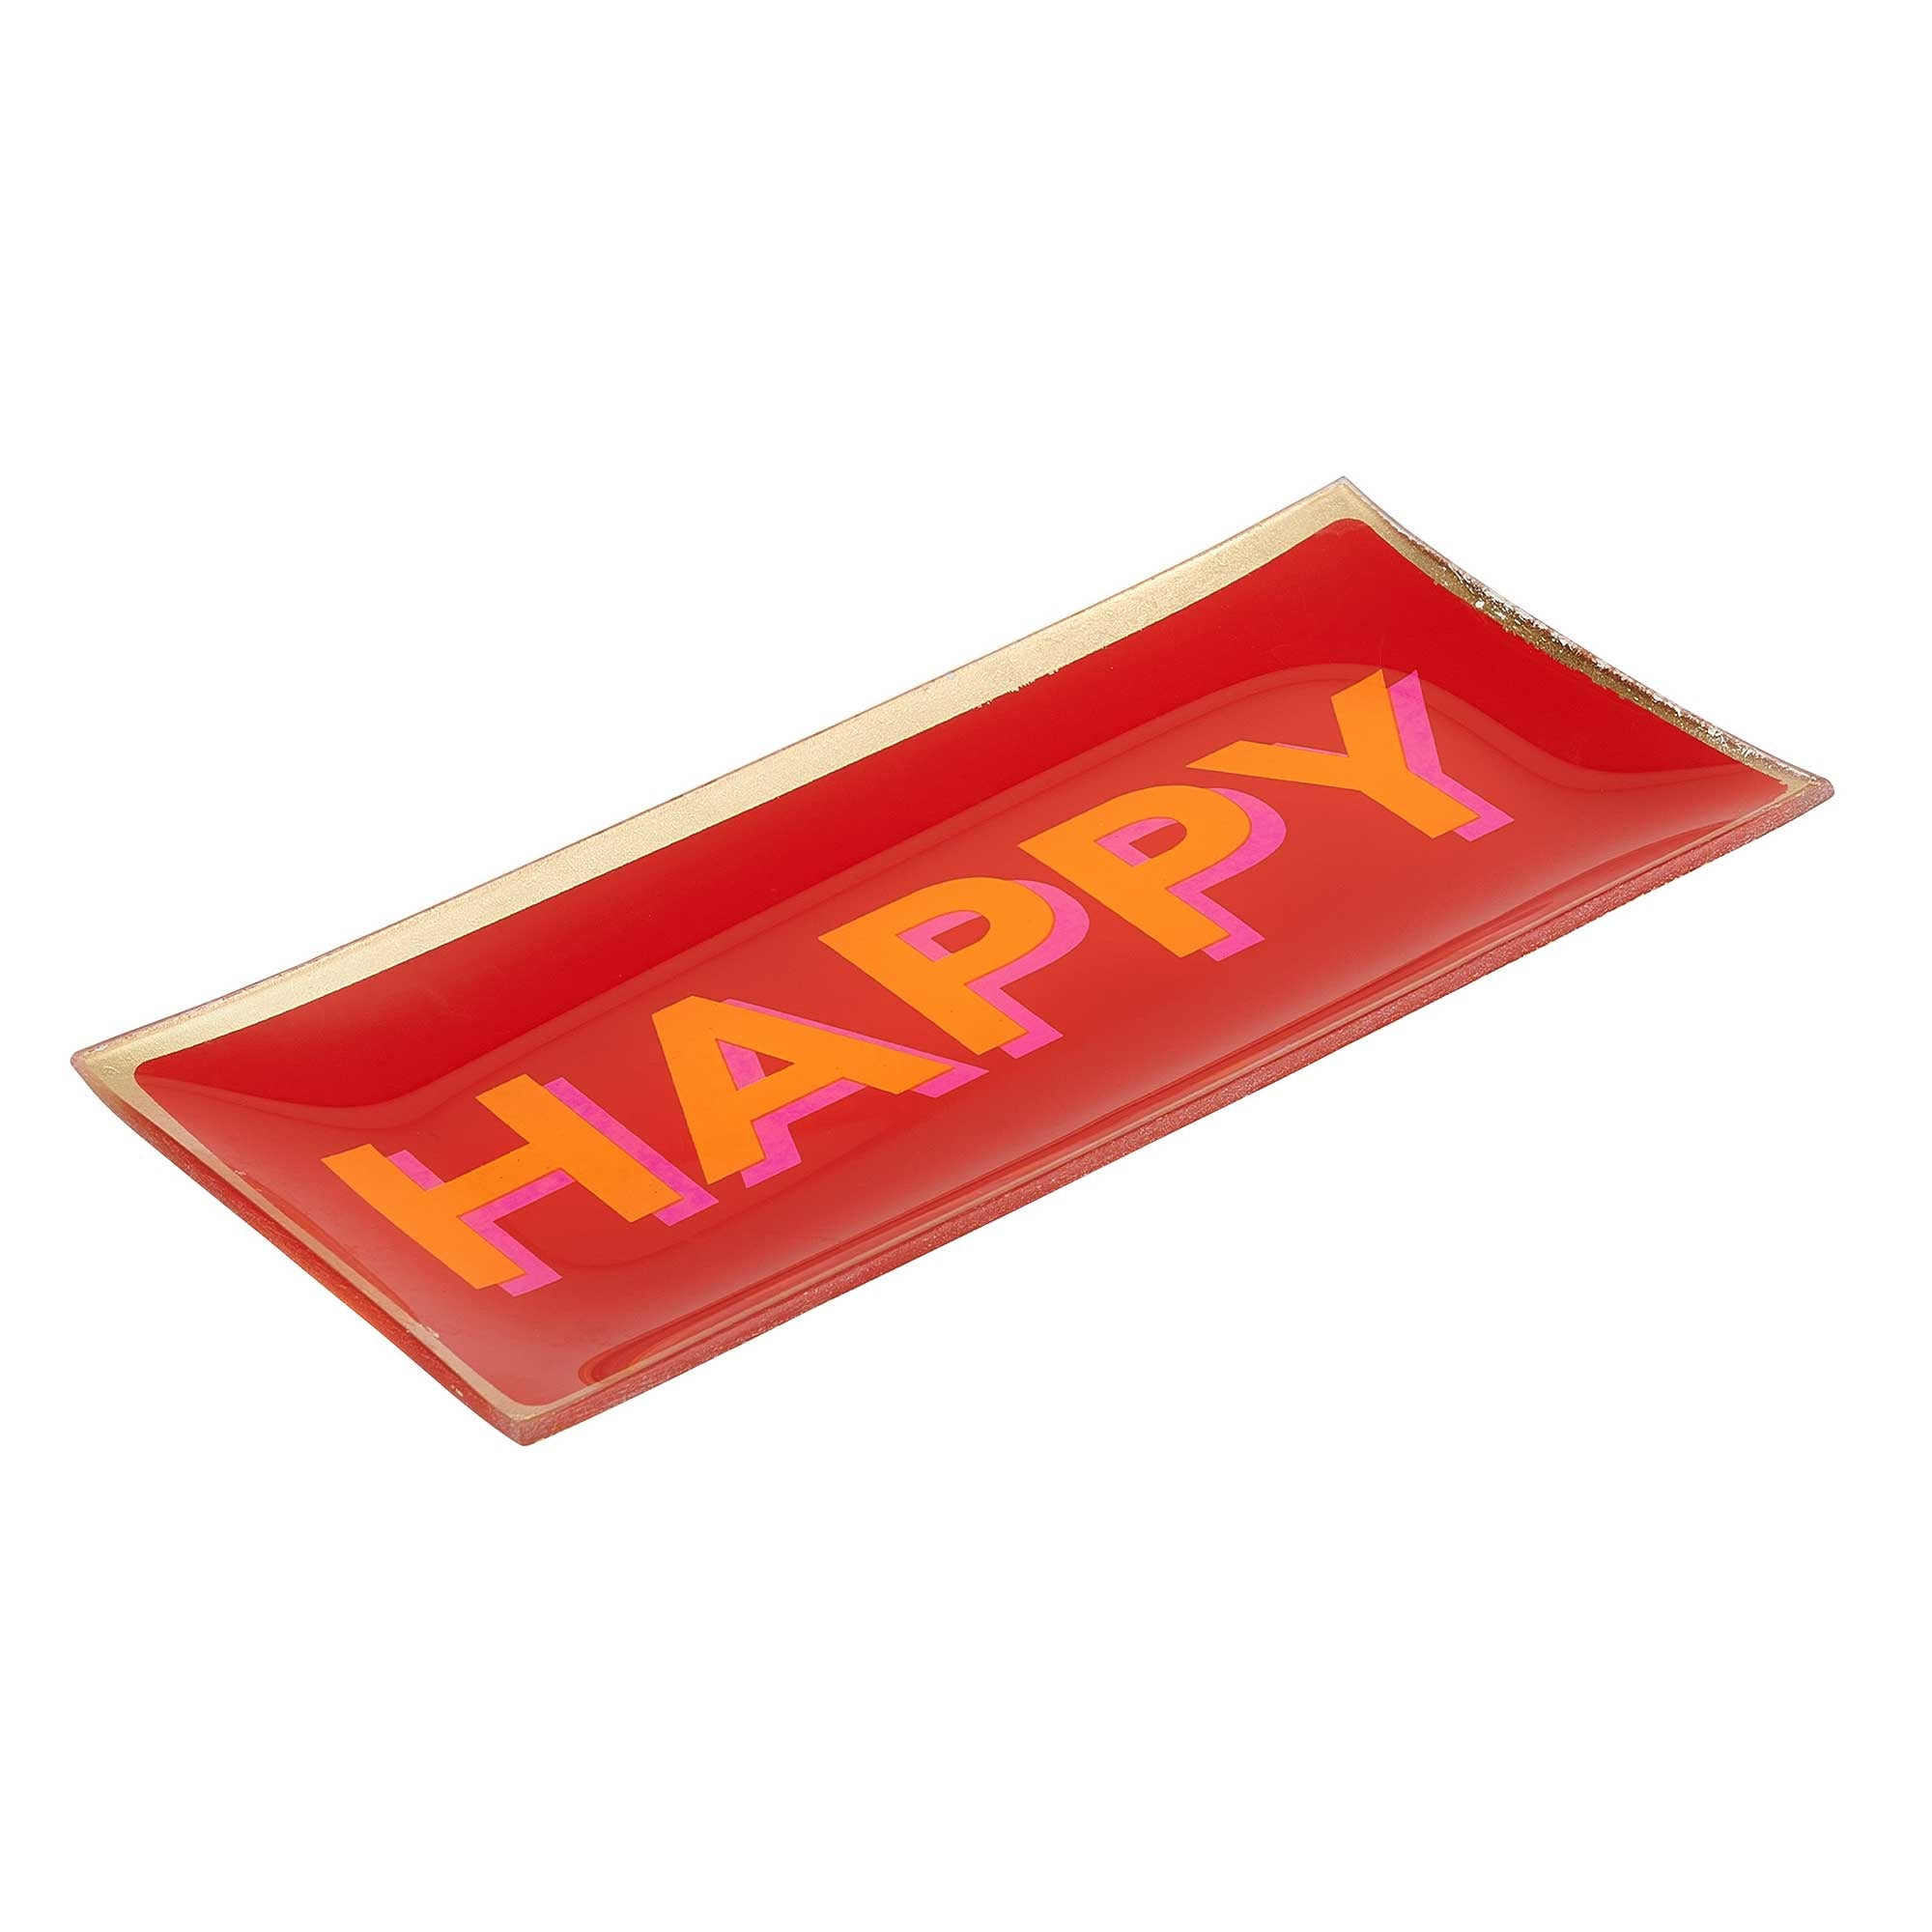 Glass plate "HAPPY" red